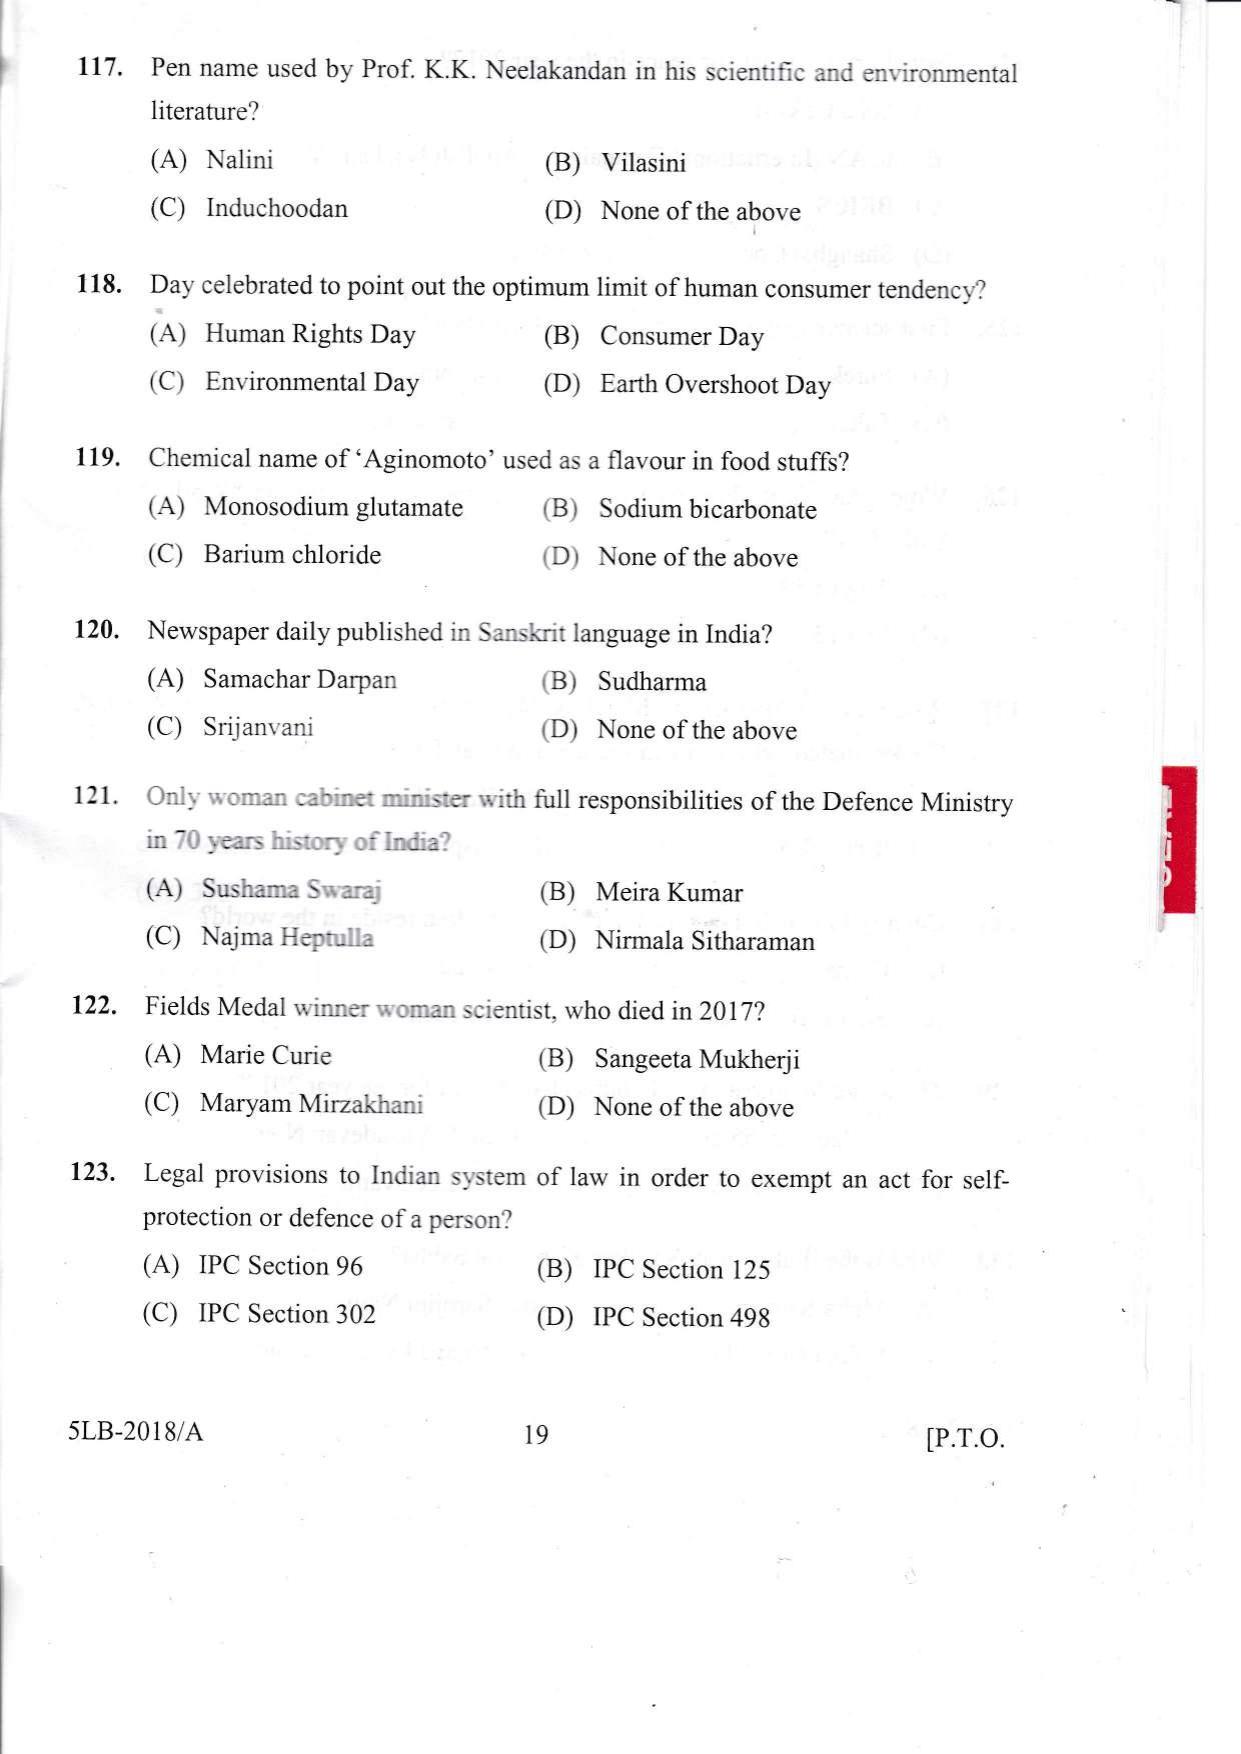 KLEE 5 Year LLB Exam 2018 Question Paper - Page 19